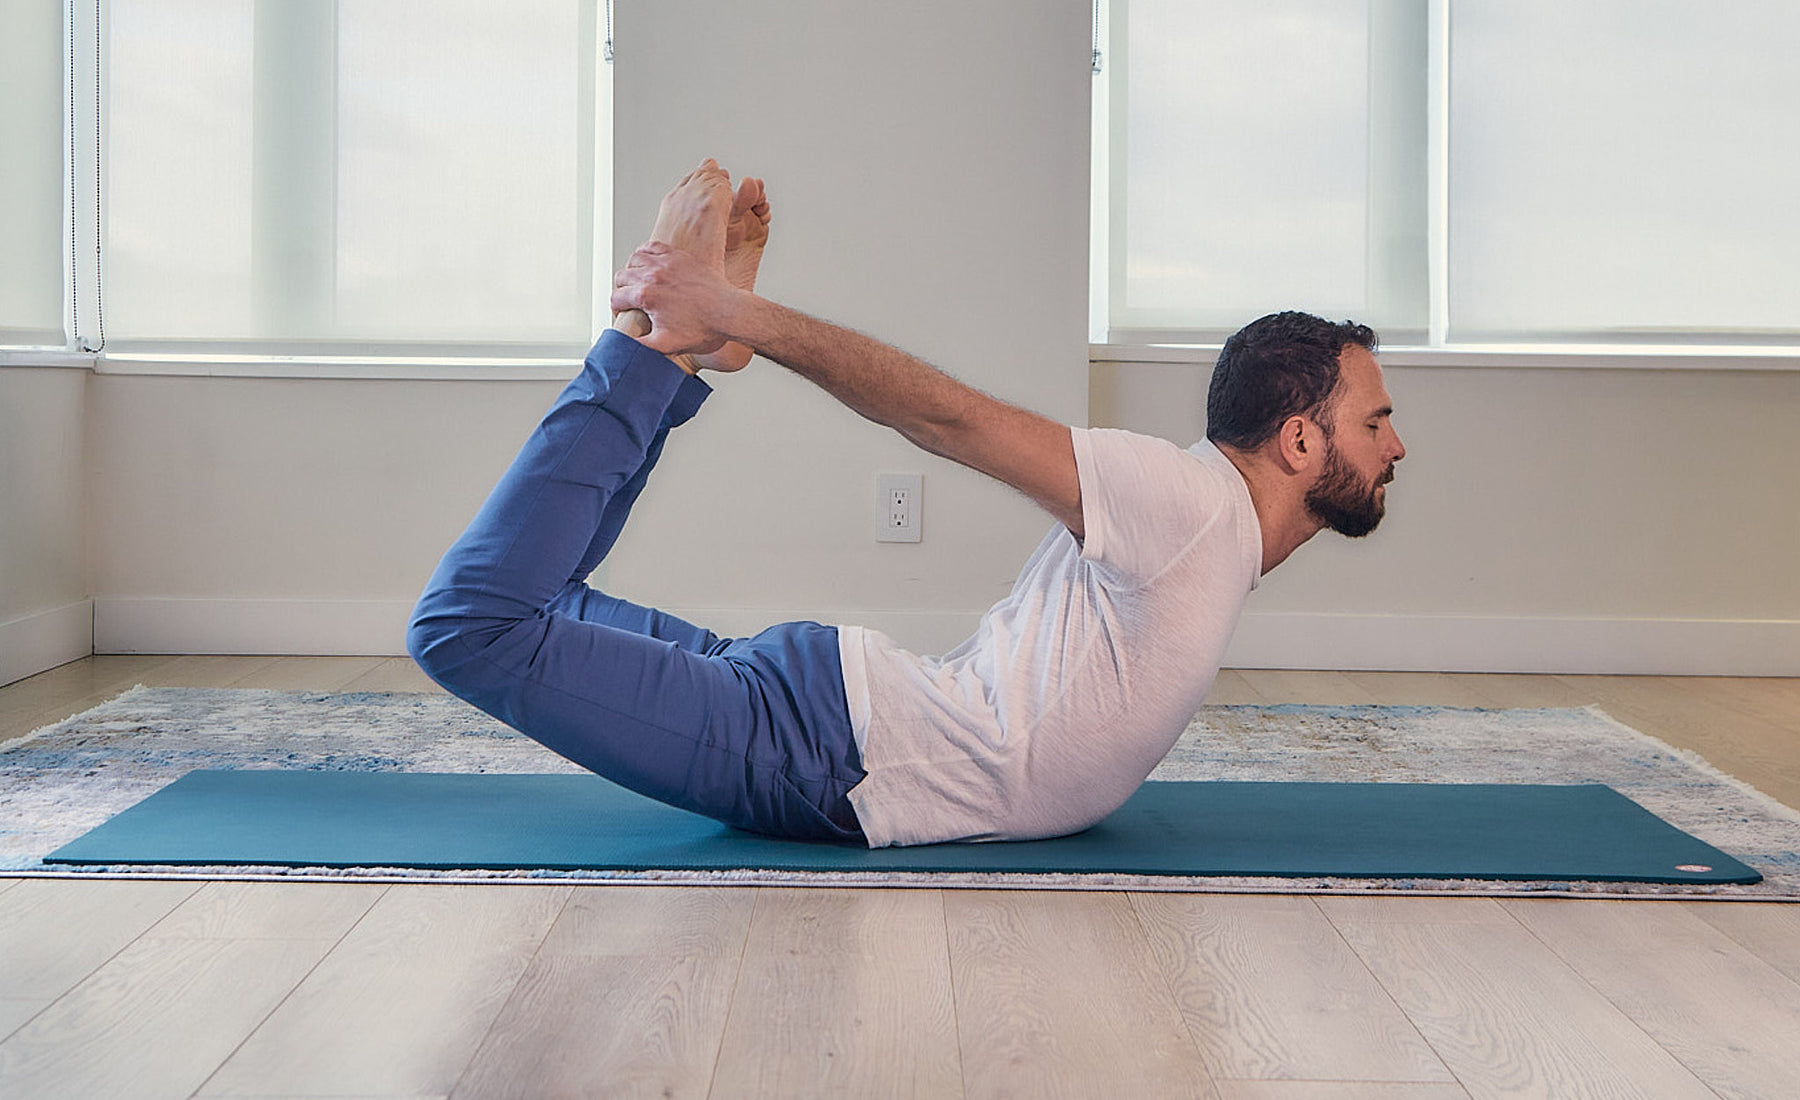 Yoga Poses to Balance your Doshas for Health & Happiness. | elephant journal